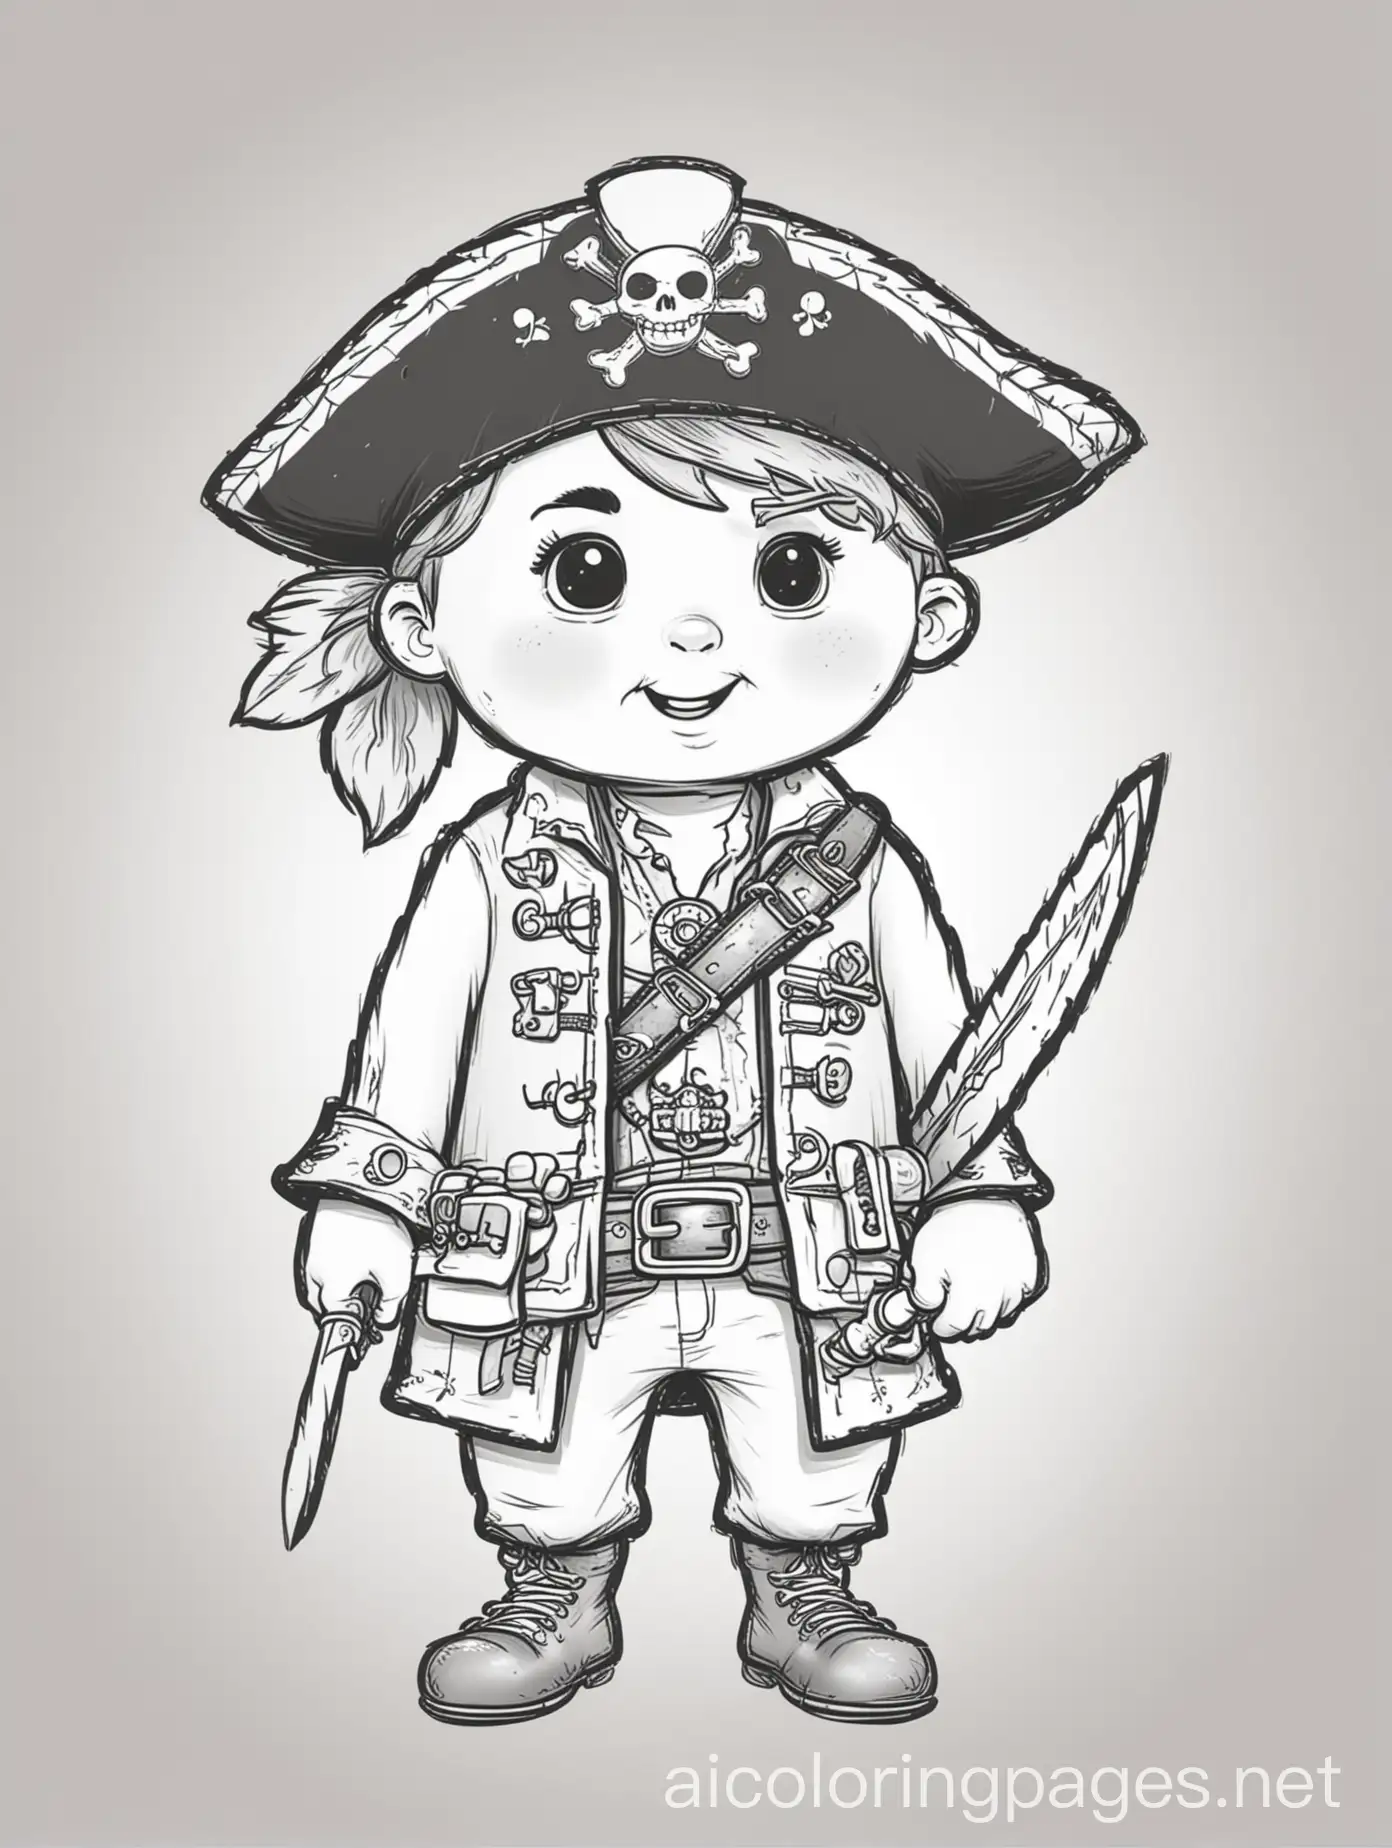 pirate for little kid's coloring book, extremely simple shapes, thick outlines, fun, cute, adorable, simplistic, for a toddler's coloring book , Coloring Page, black and white, line art, white background, Simplicity, Ample White Space. The background of the coloring page is plain white to make it easy for young children to color within the lines. The outlines of all the subjects are easy to distinguish, making it simple for kids to color without too much difficulty